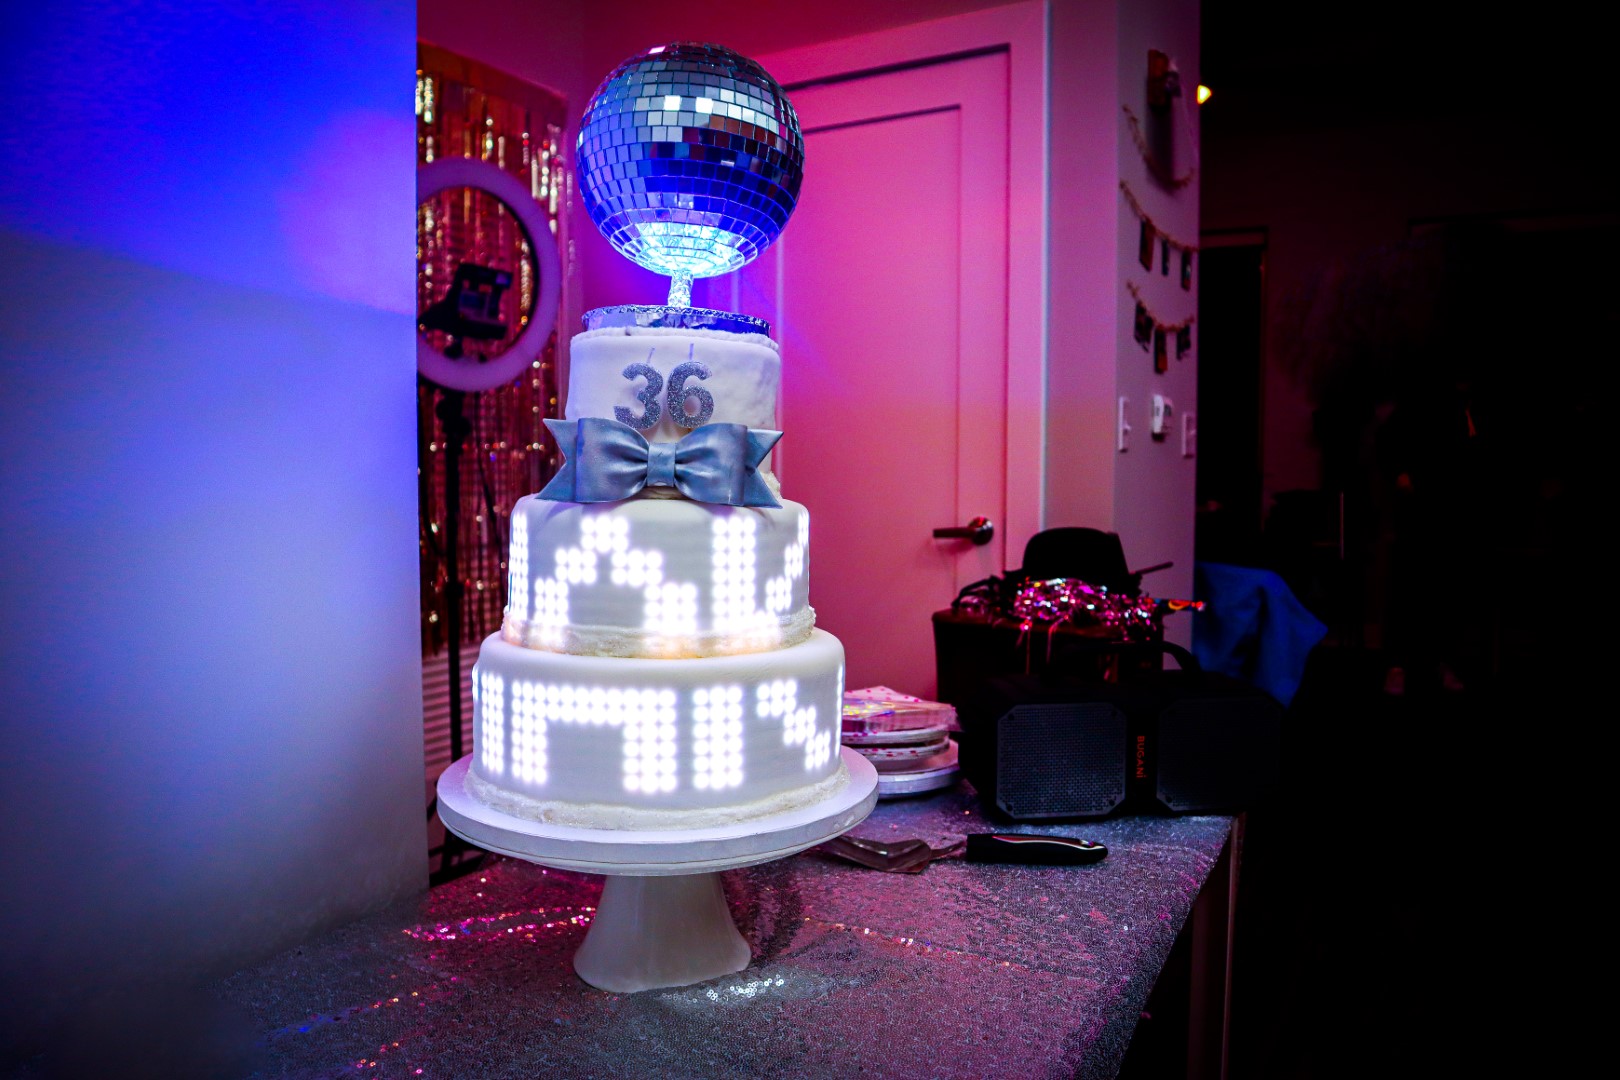 Embedded LEDs Make The Coolest Birthday Cake You’ve Ever Seen